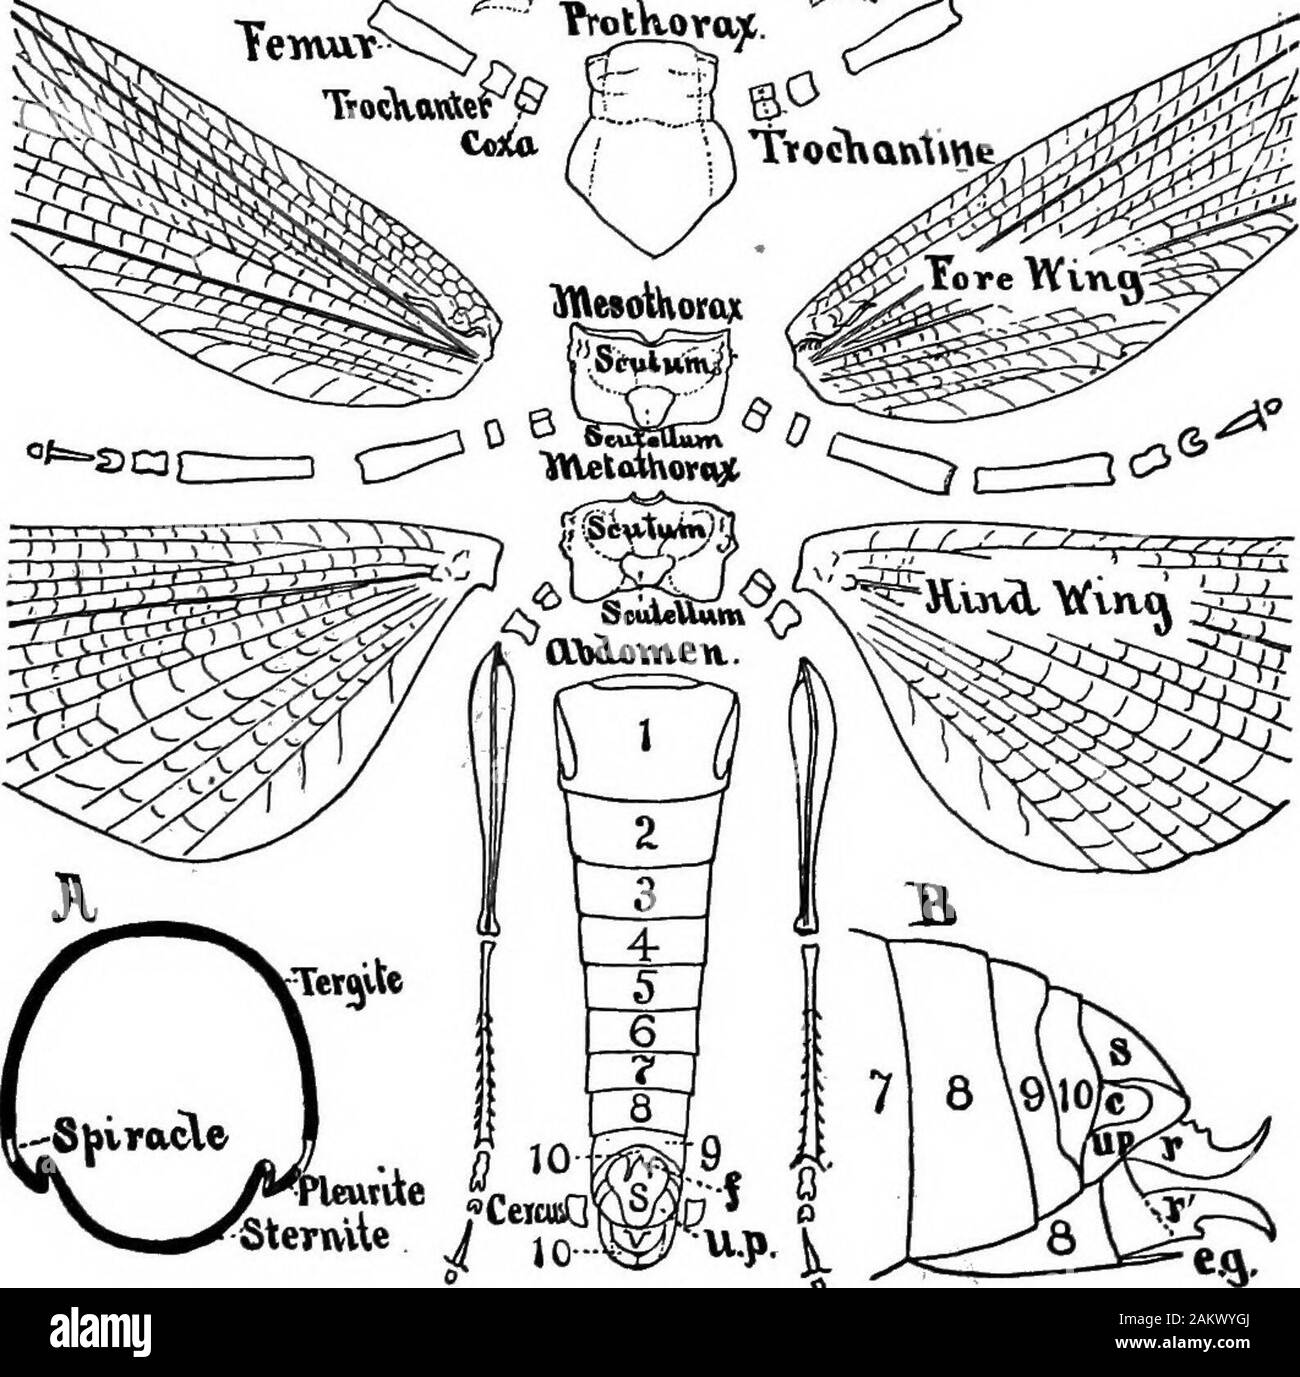 First lesson in zoology : adapted for use in schools . ^K Til.vS?*S if^™^ tpUwwuw. wm 1.^. Fio. 97.-Extemal anatomy of Caloptenus spretus, the.headand thorax disjointed. (To face page 91.) CHAPTER XII.MILLEPEDES AND CENTIPEDES.* The millepedes and centipedes are examples of the classMyriopoda, so called from tlie numerous feet they possess.If we examine a common millepede, called Julus, whichmay be found under sticks and dead leaves in damp places,its body will be seen to consist of a head with short anten-nae succeeded by a large number of cylindrical segments,each bearing two pairs of feet, Stock Photo